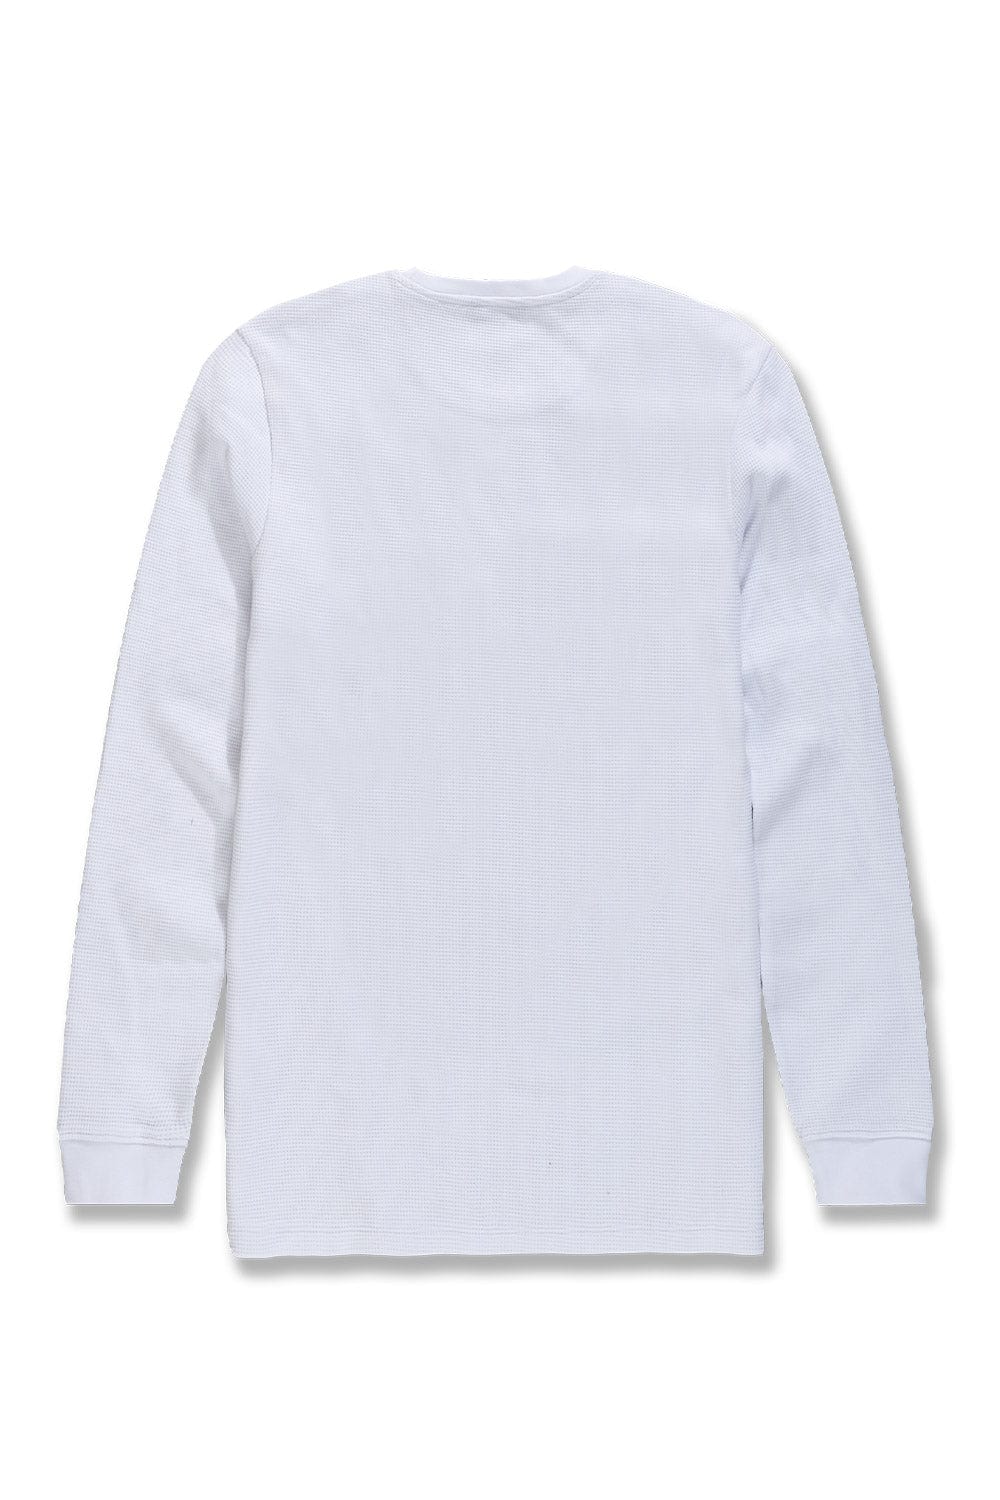 Men's Heavyweight Cotton Long Sleeve Thermal Top, White 3XL, 1 Count, 1 Pack